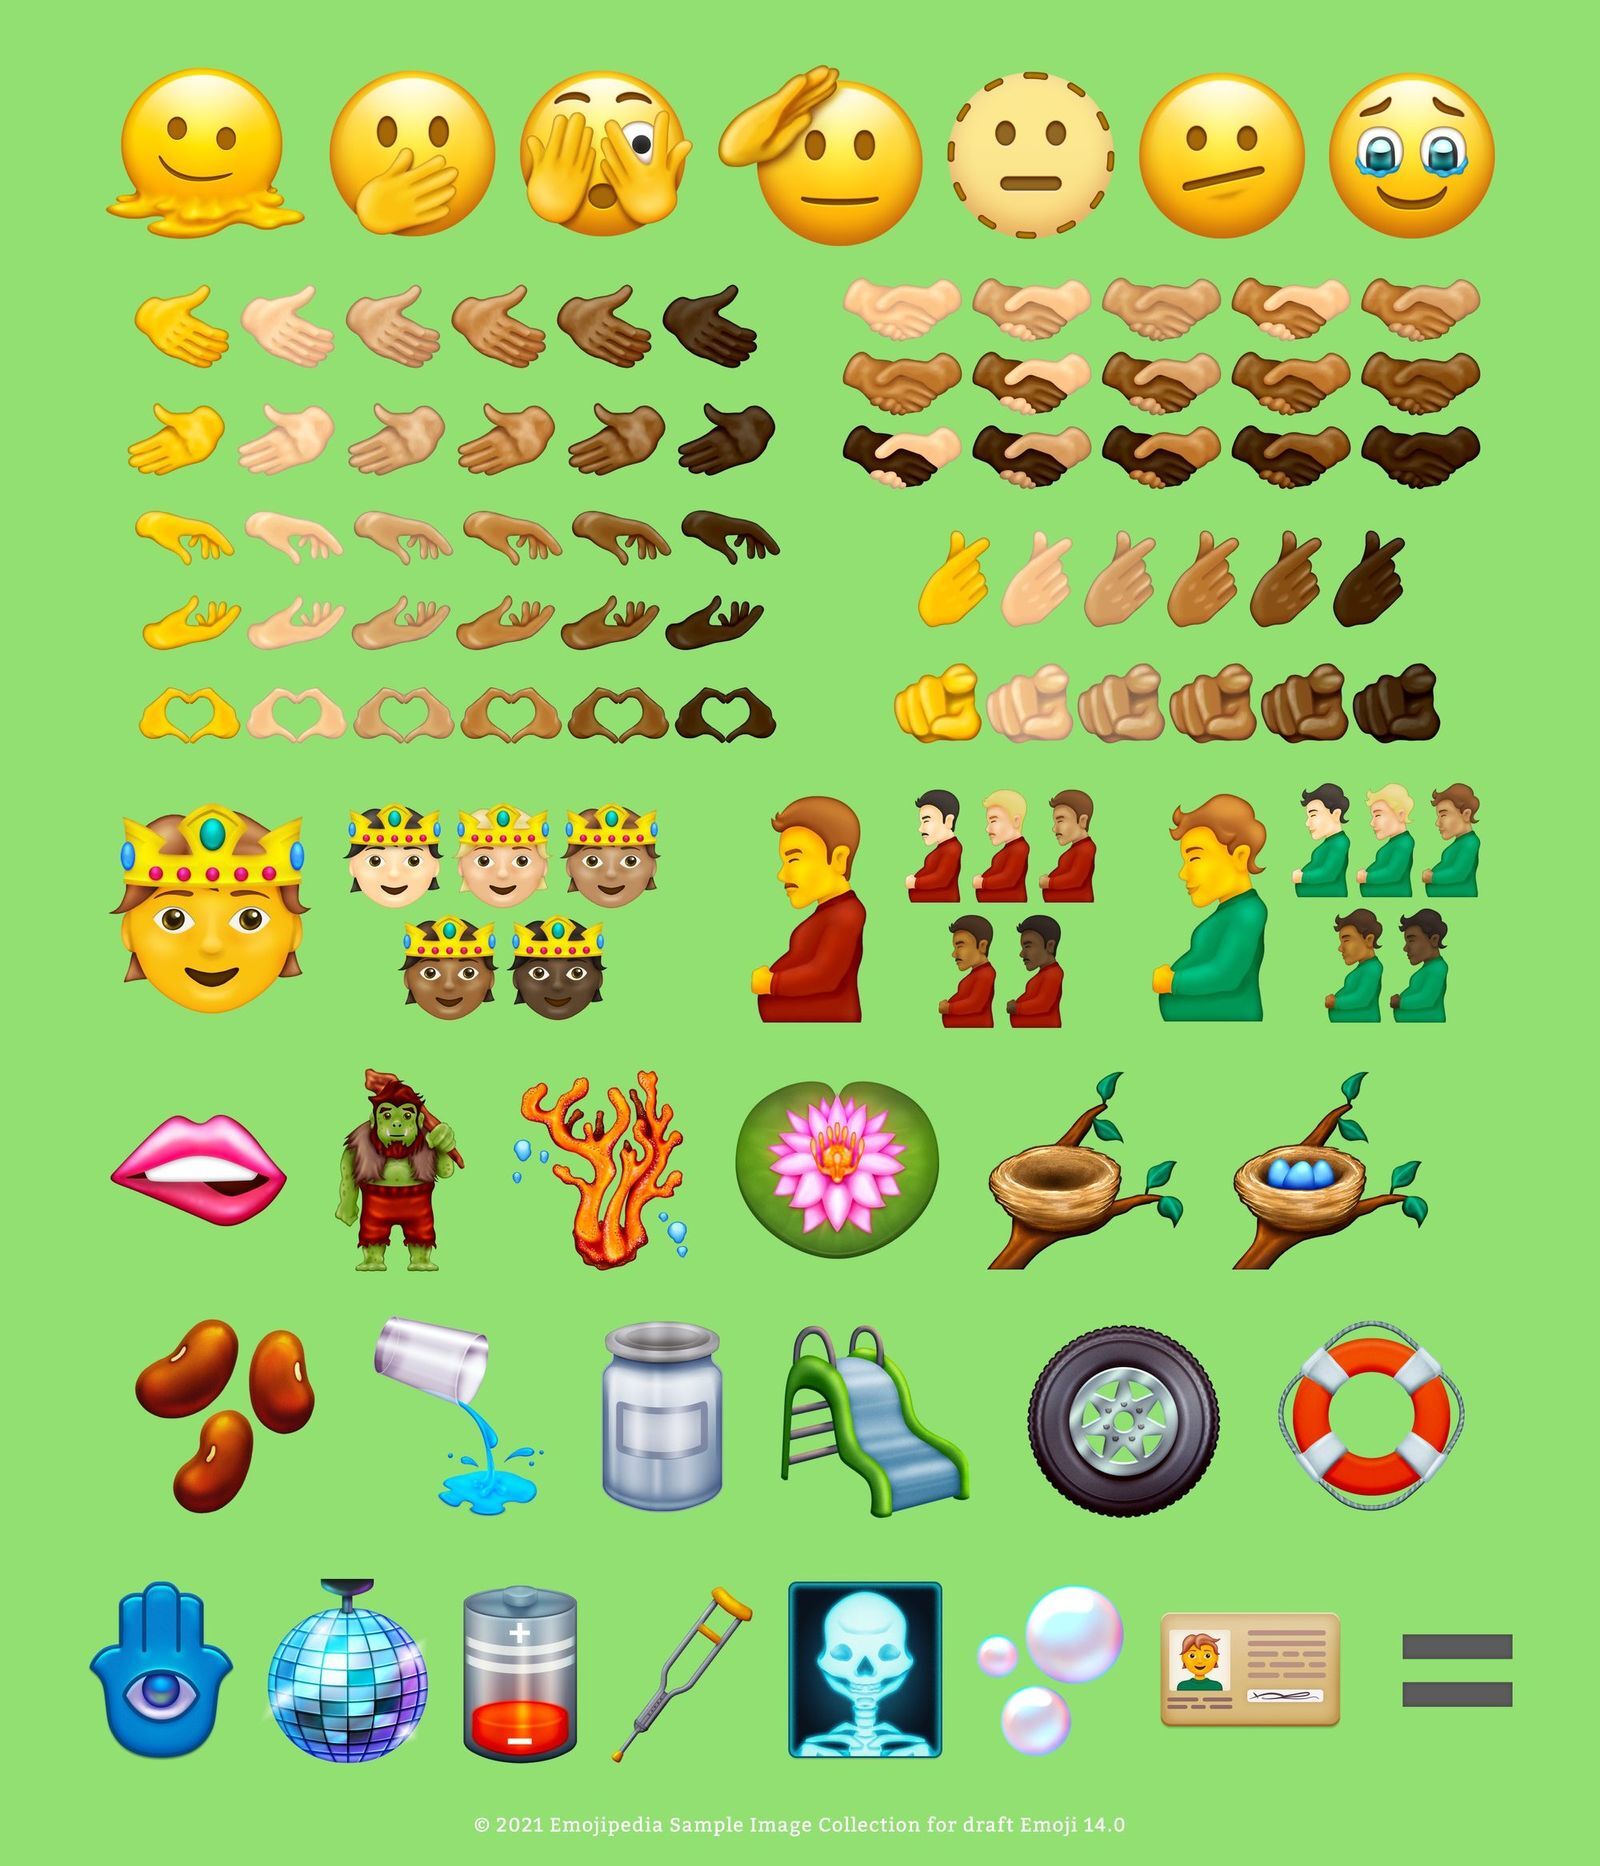 Check out the new emoji that could come to iPhone and Android